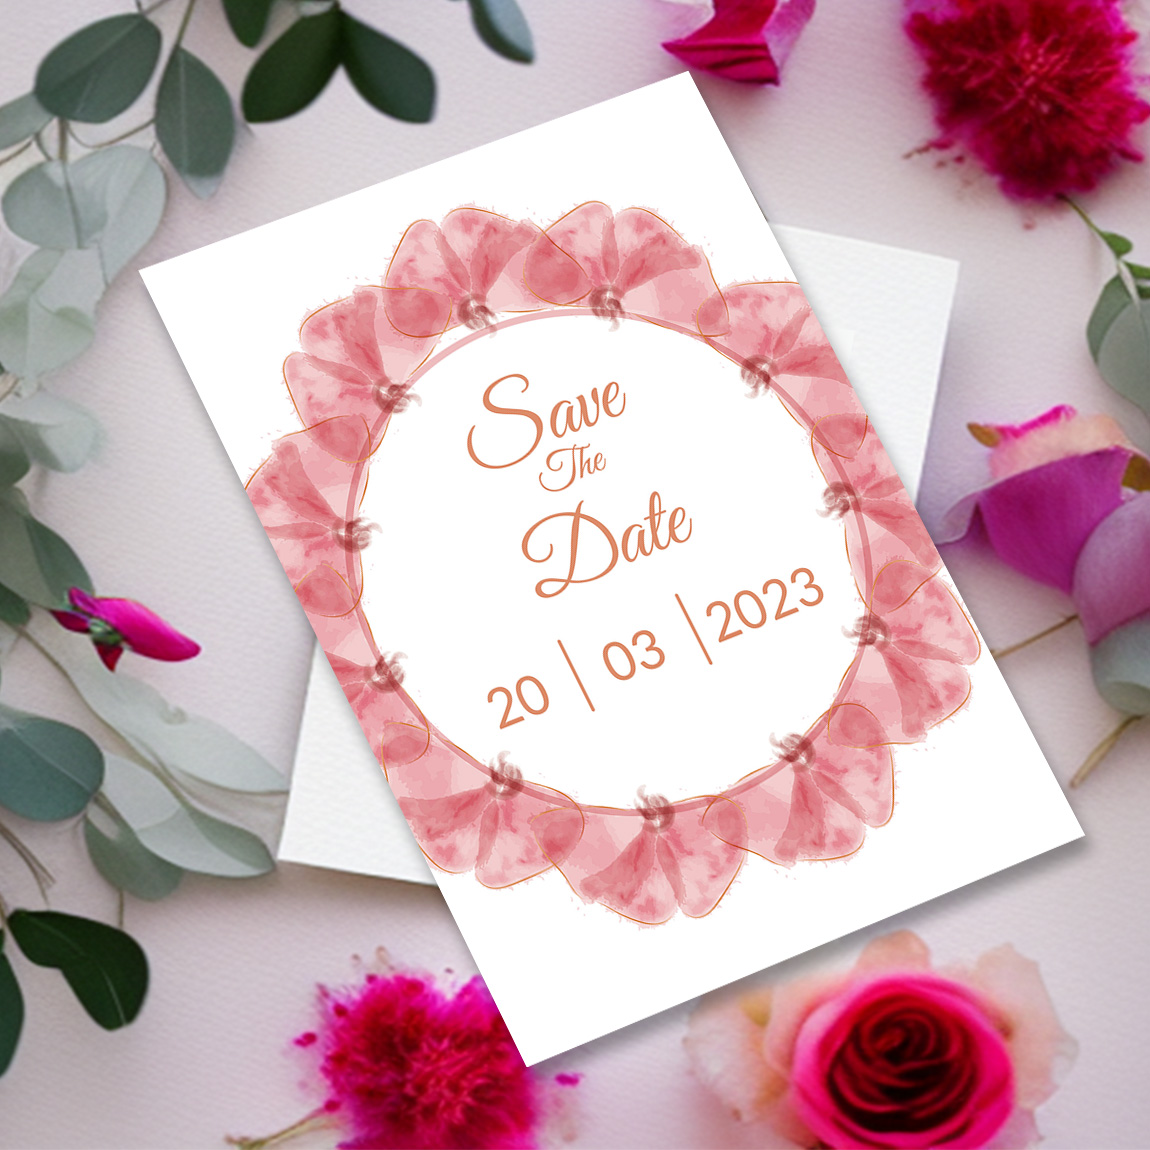 Image with enchanting wedding invitation card in pink tones and flowers.